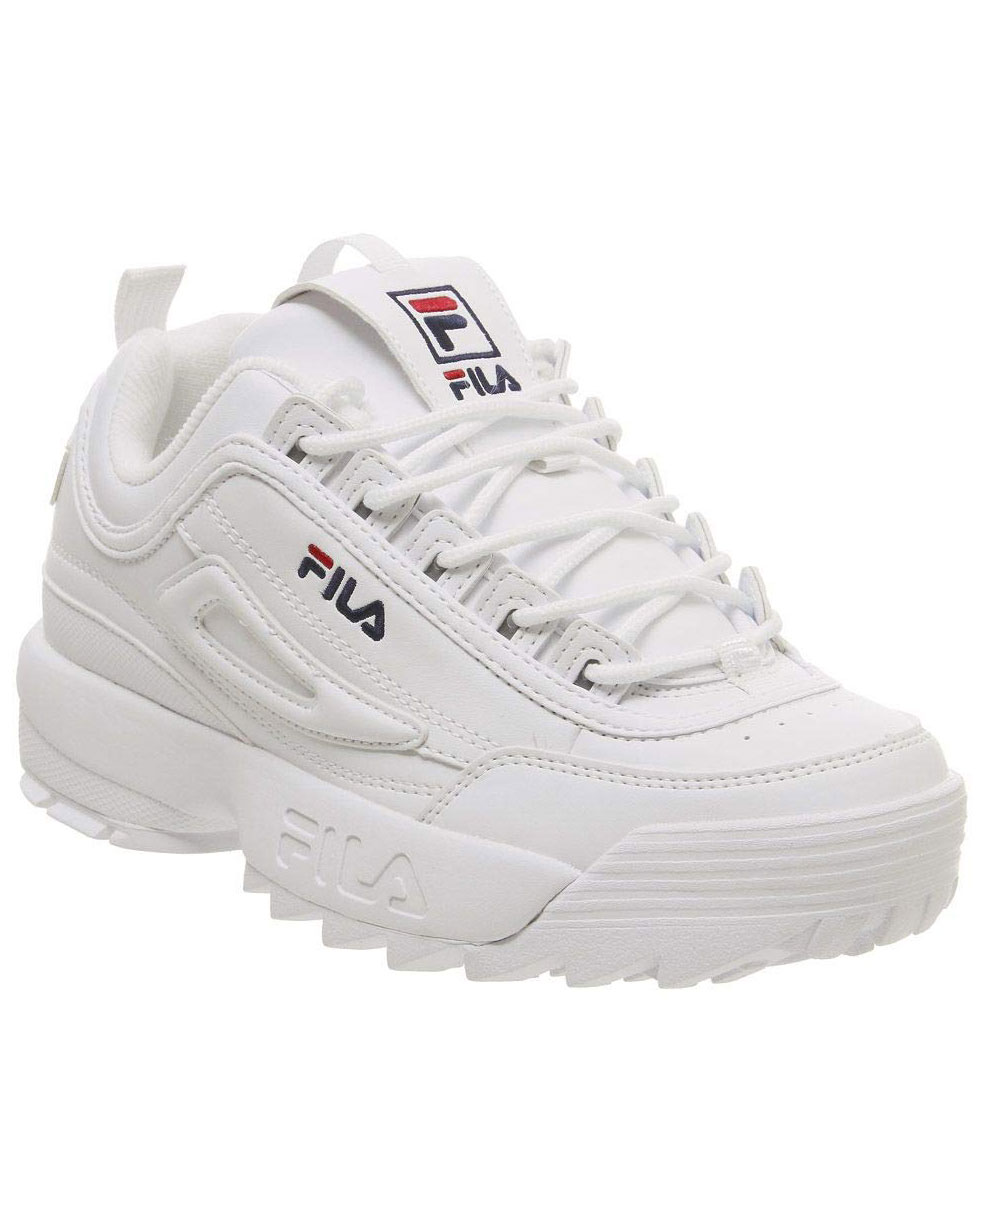 Disruptor II Letter Sneakers Shoes White